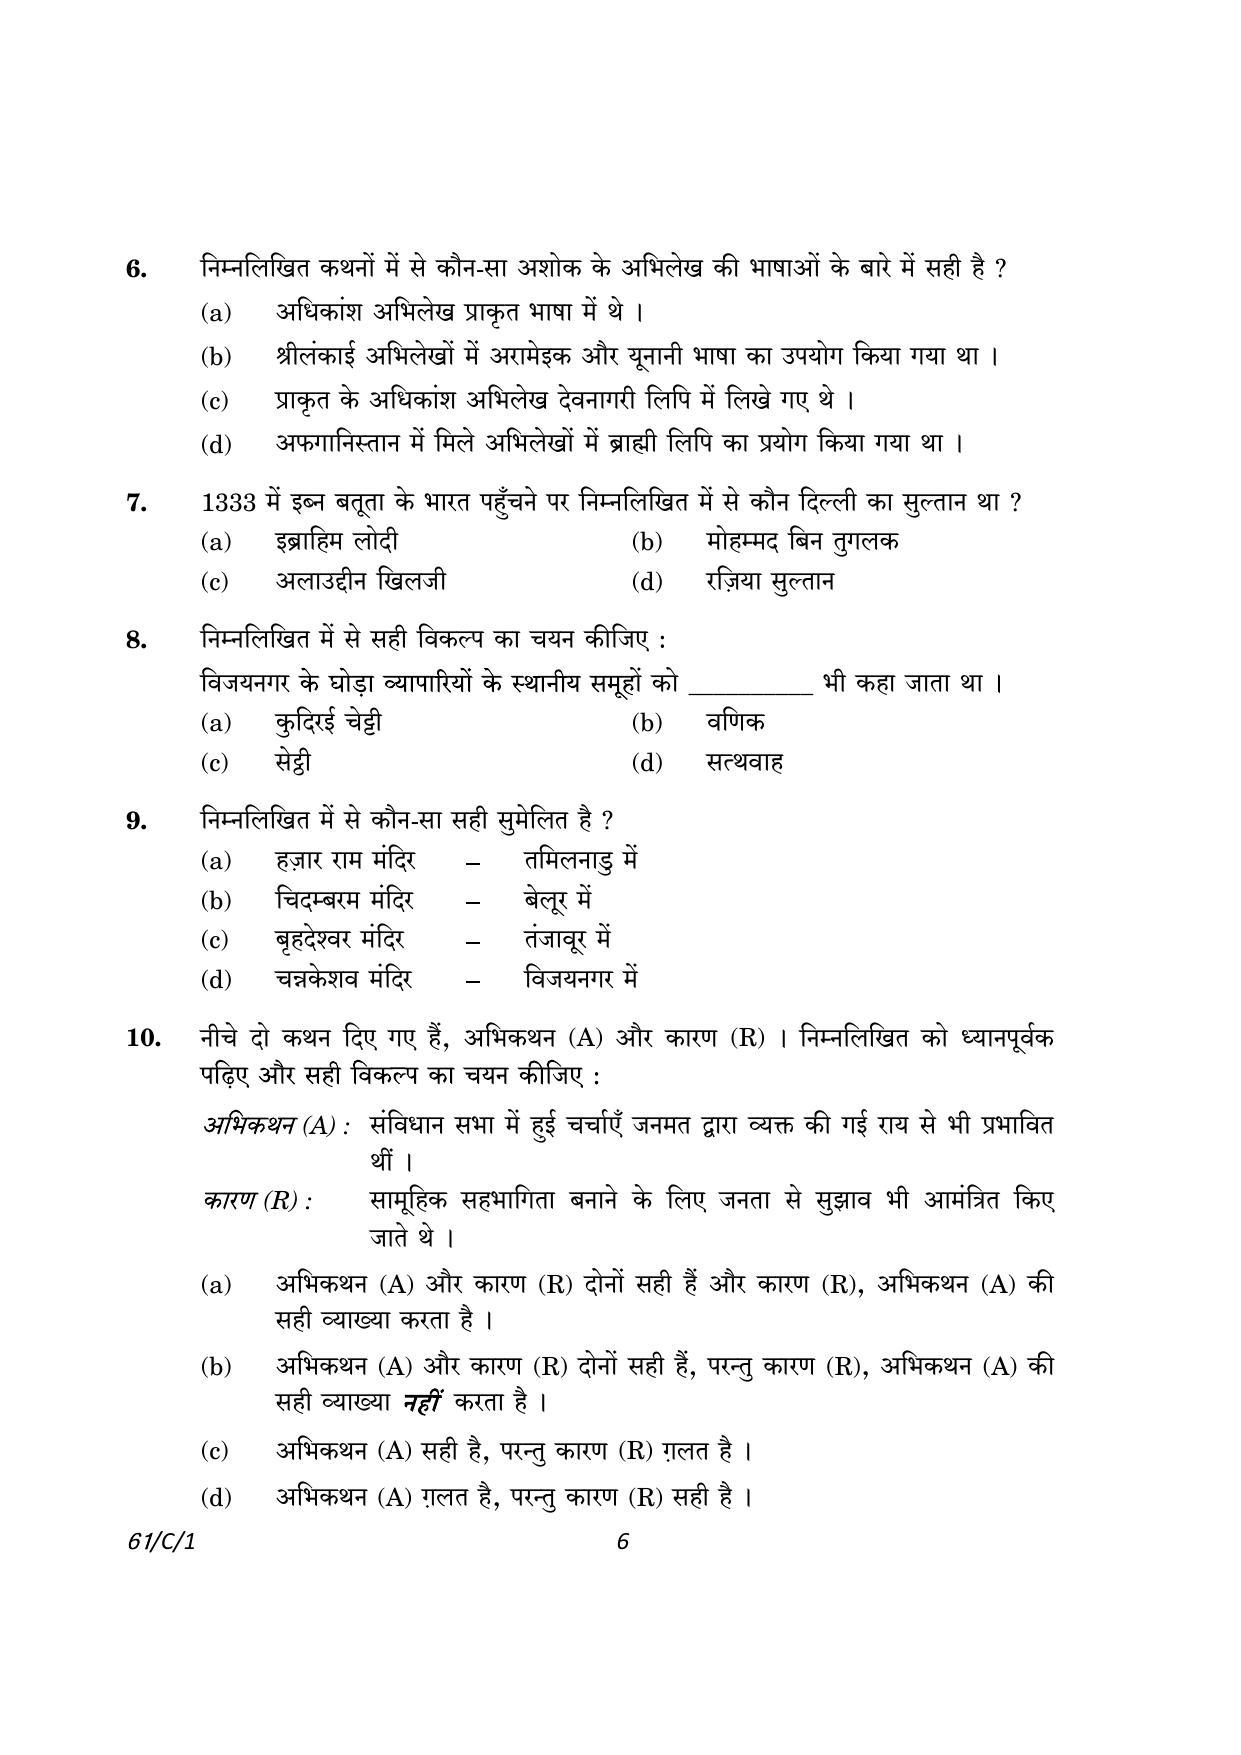 CBSE Class 12 61-1 History 2023 (Compartment) Question Paper - Page 6